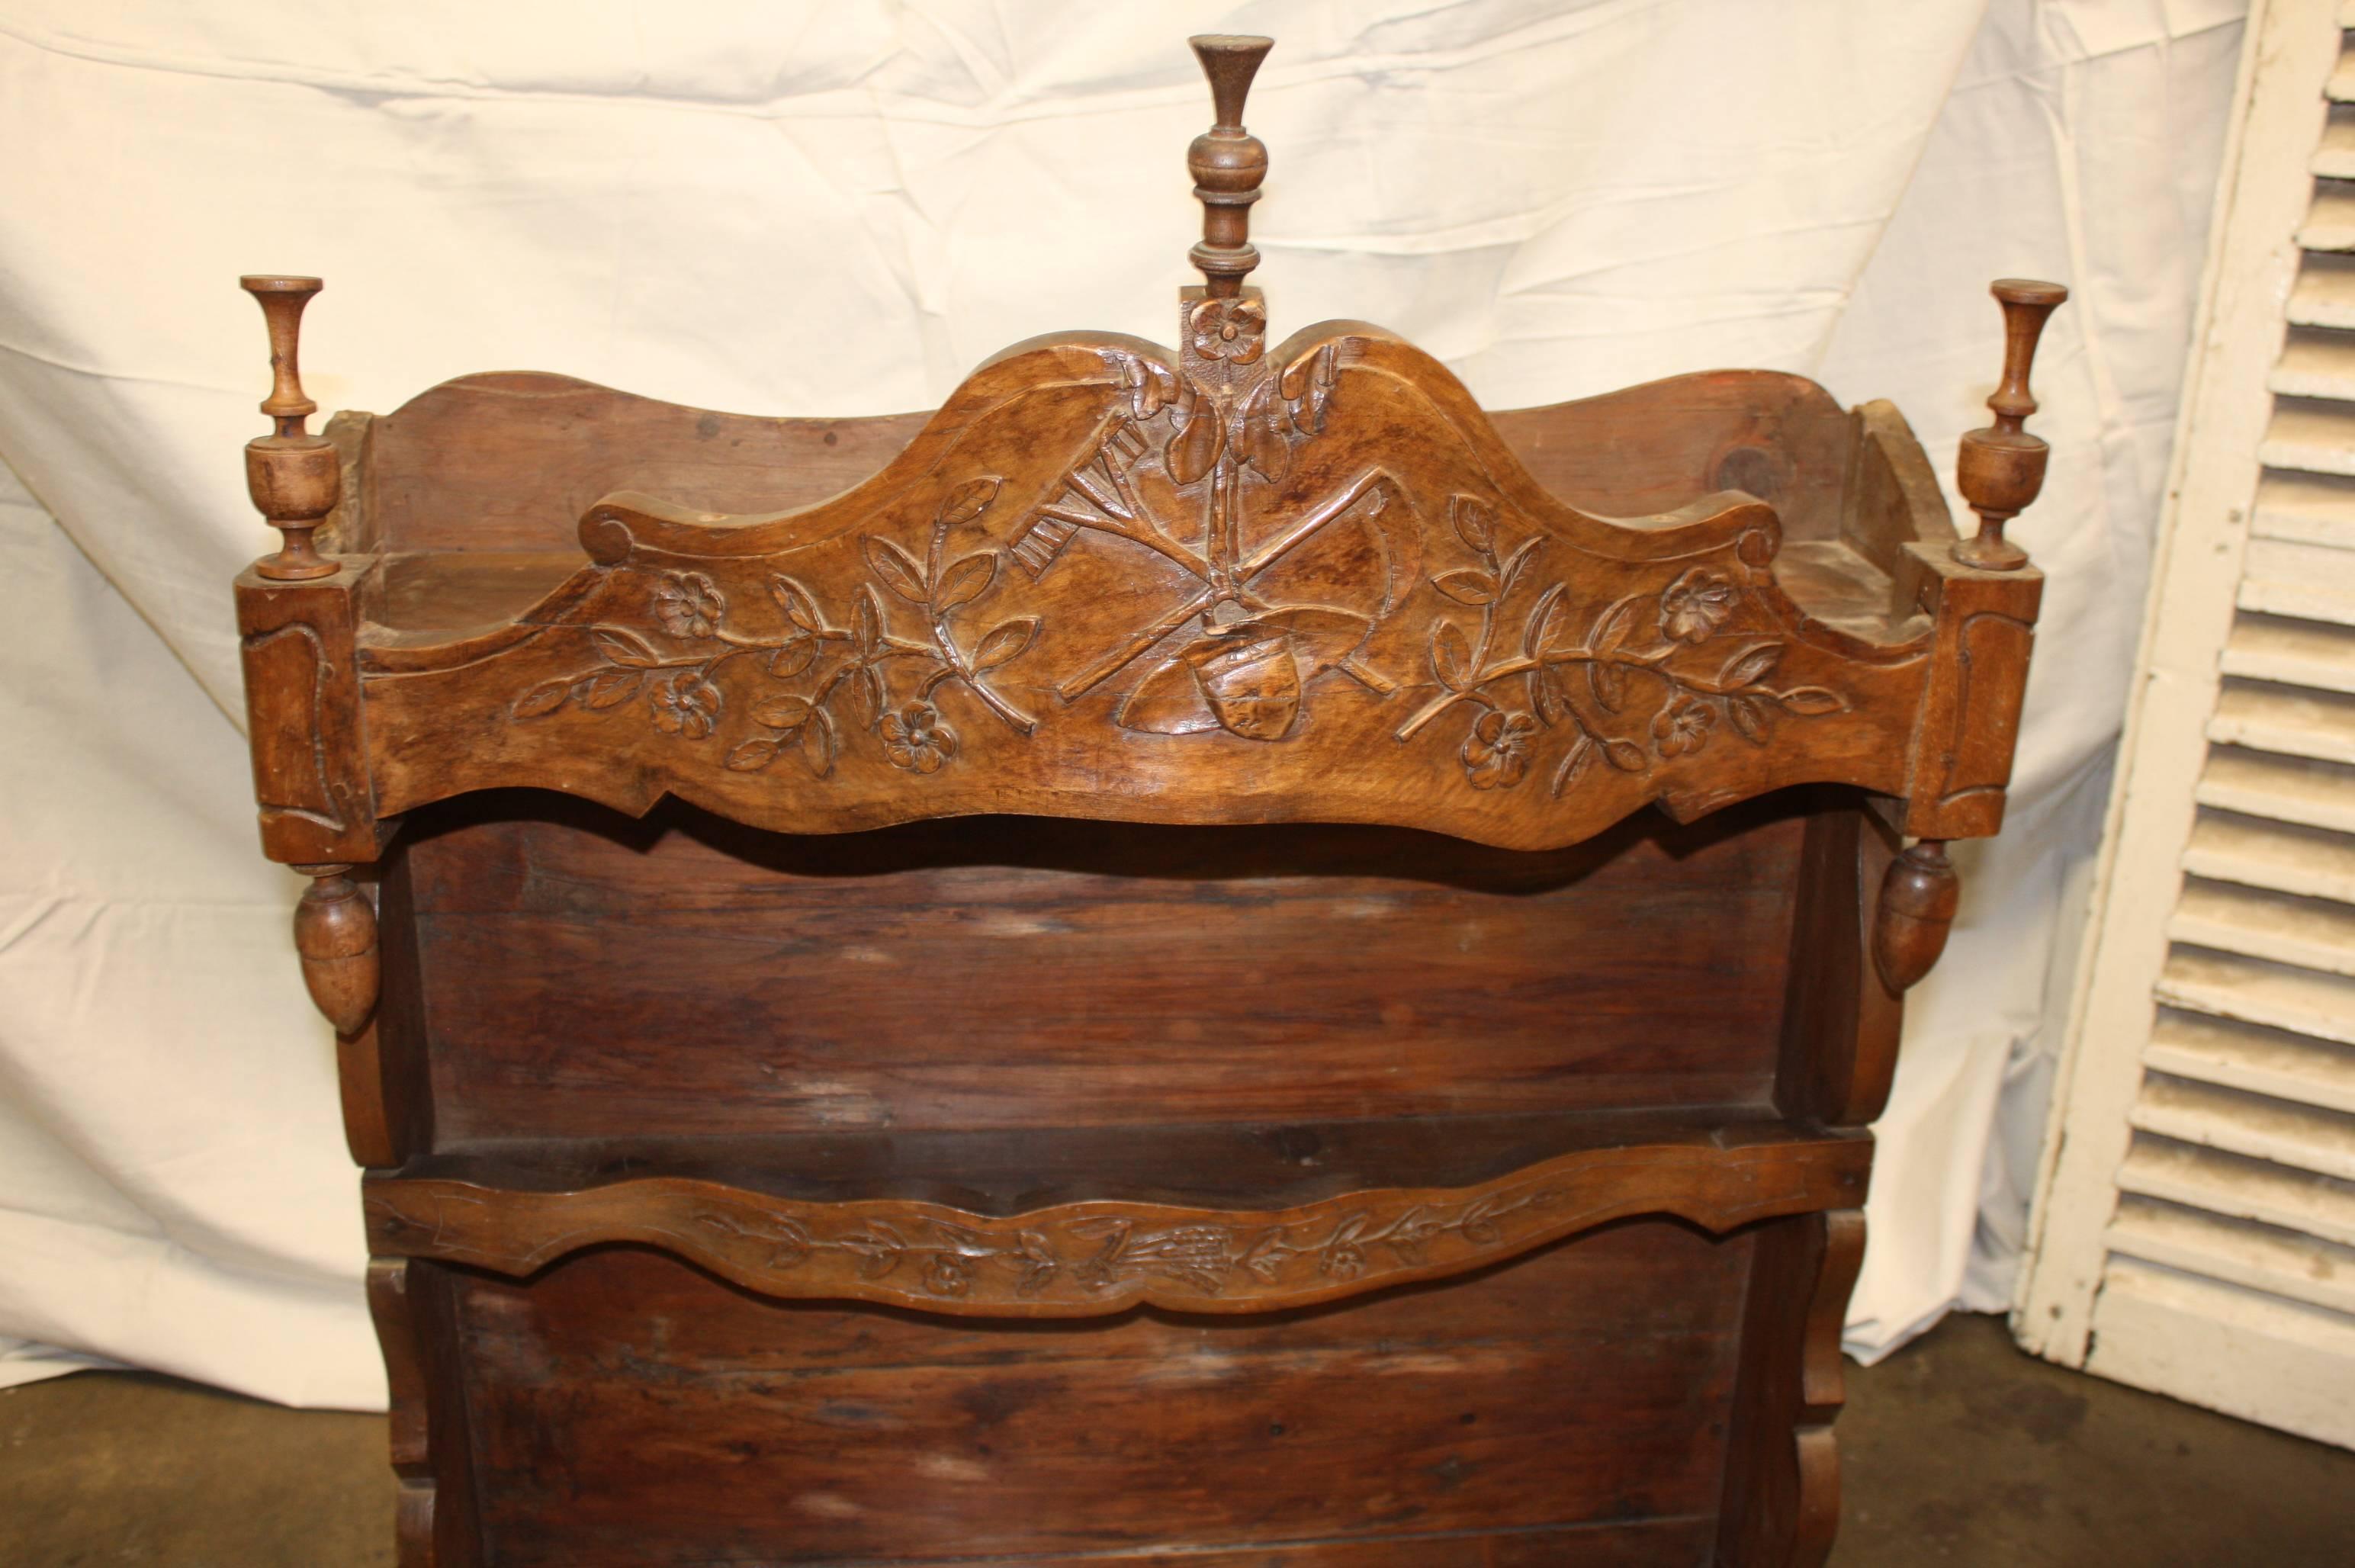 Hand-Carved Beautiful 18th Century Shelve from Provence